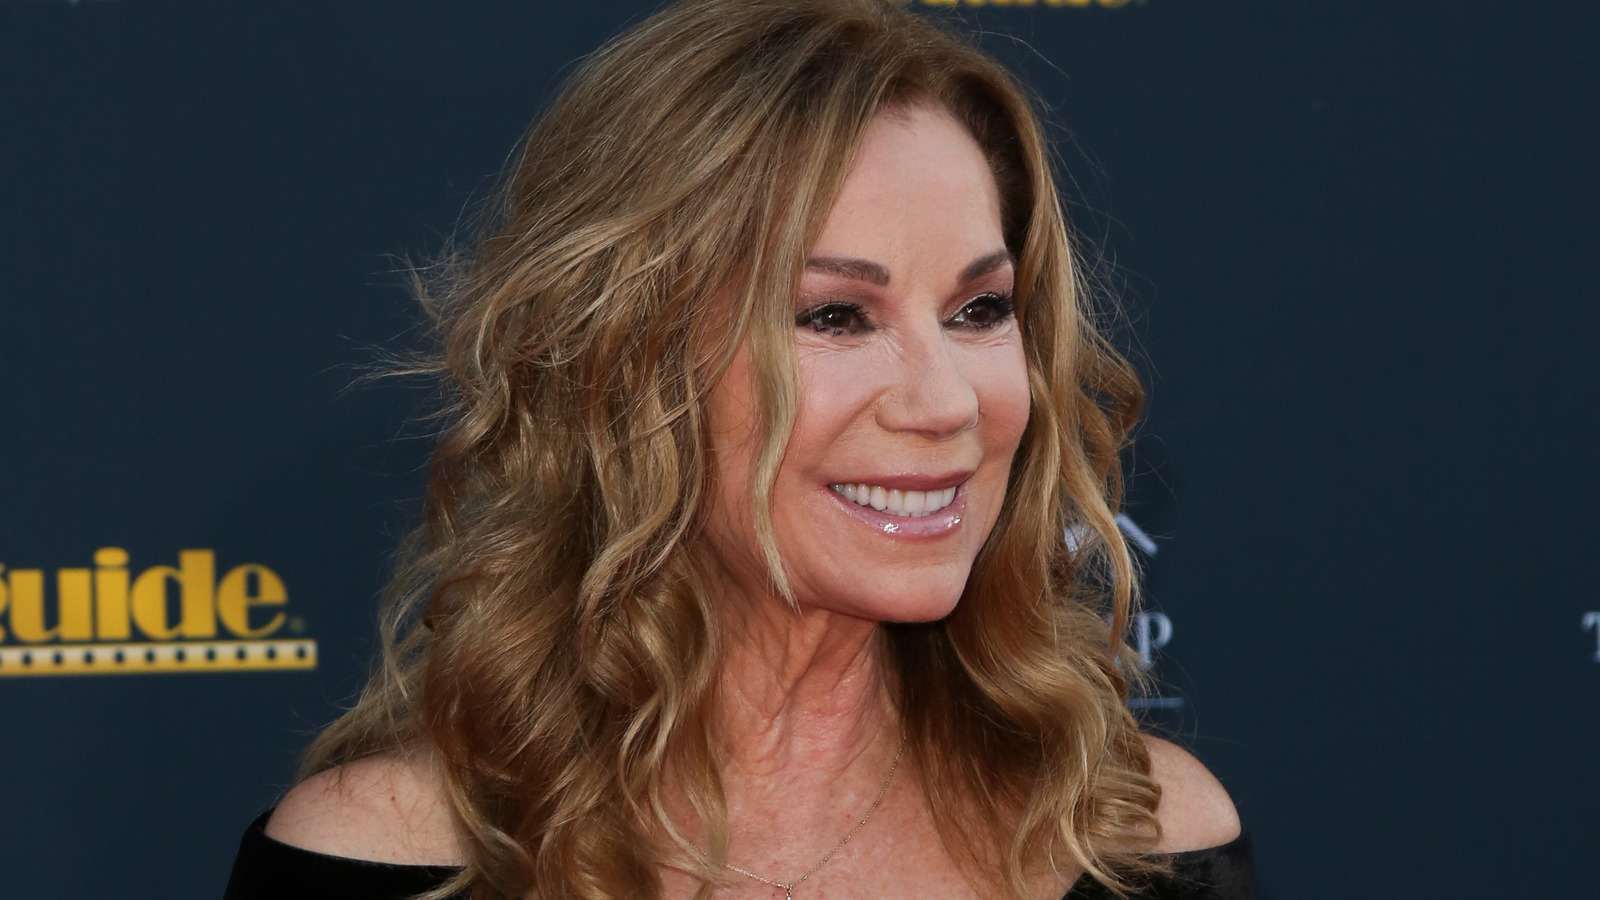 The Sweatshop Scandal Kathie Lee Gifford Was Involved In